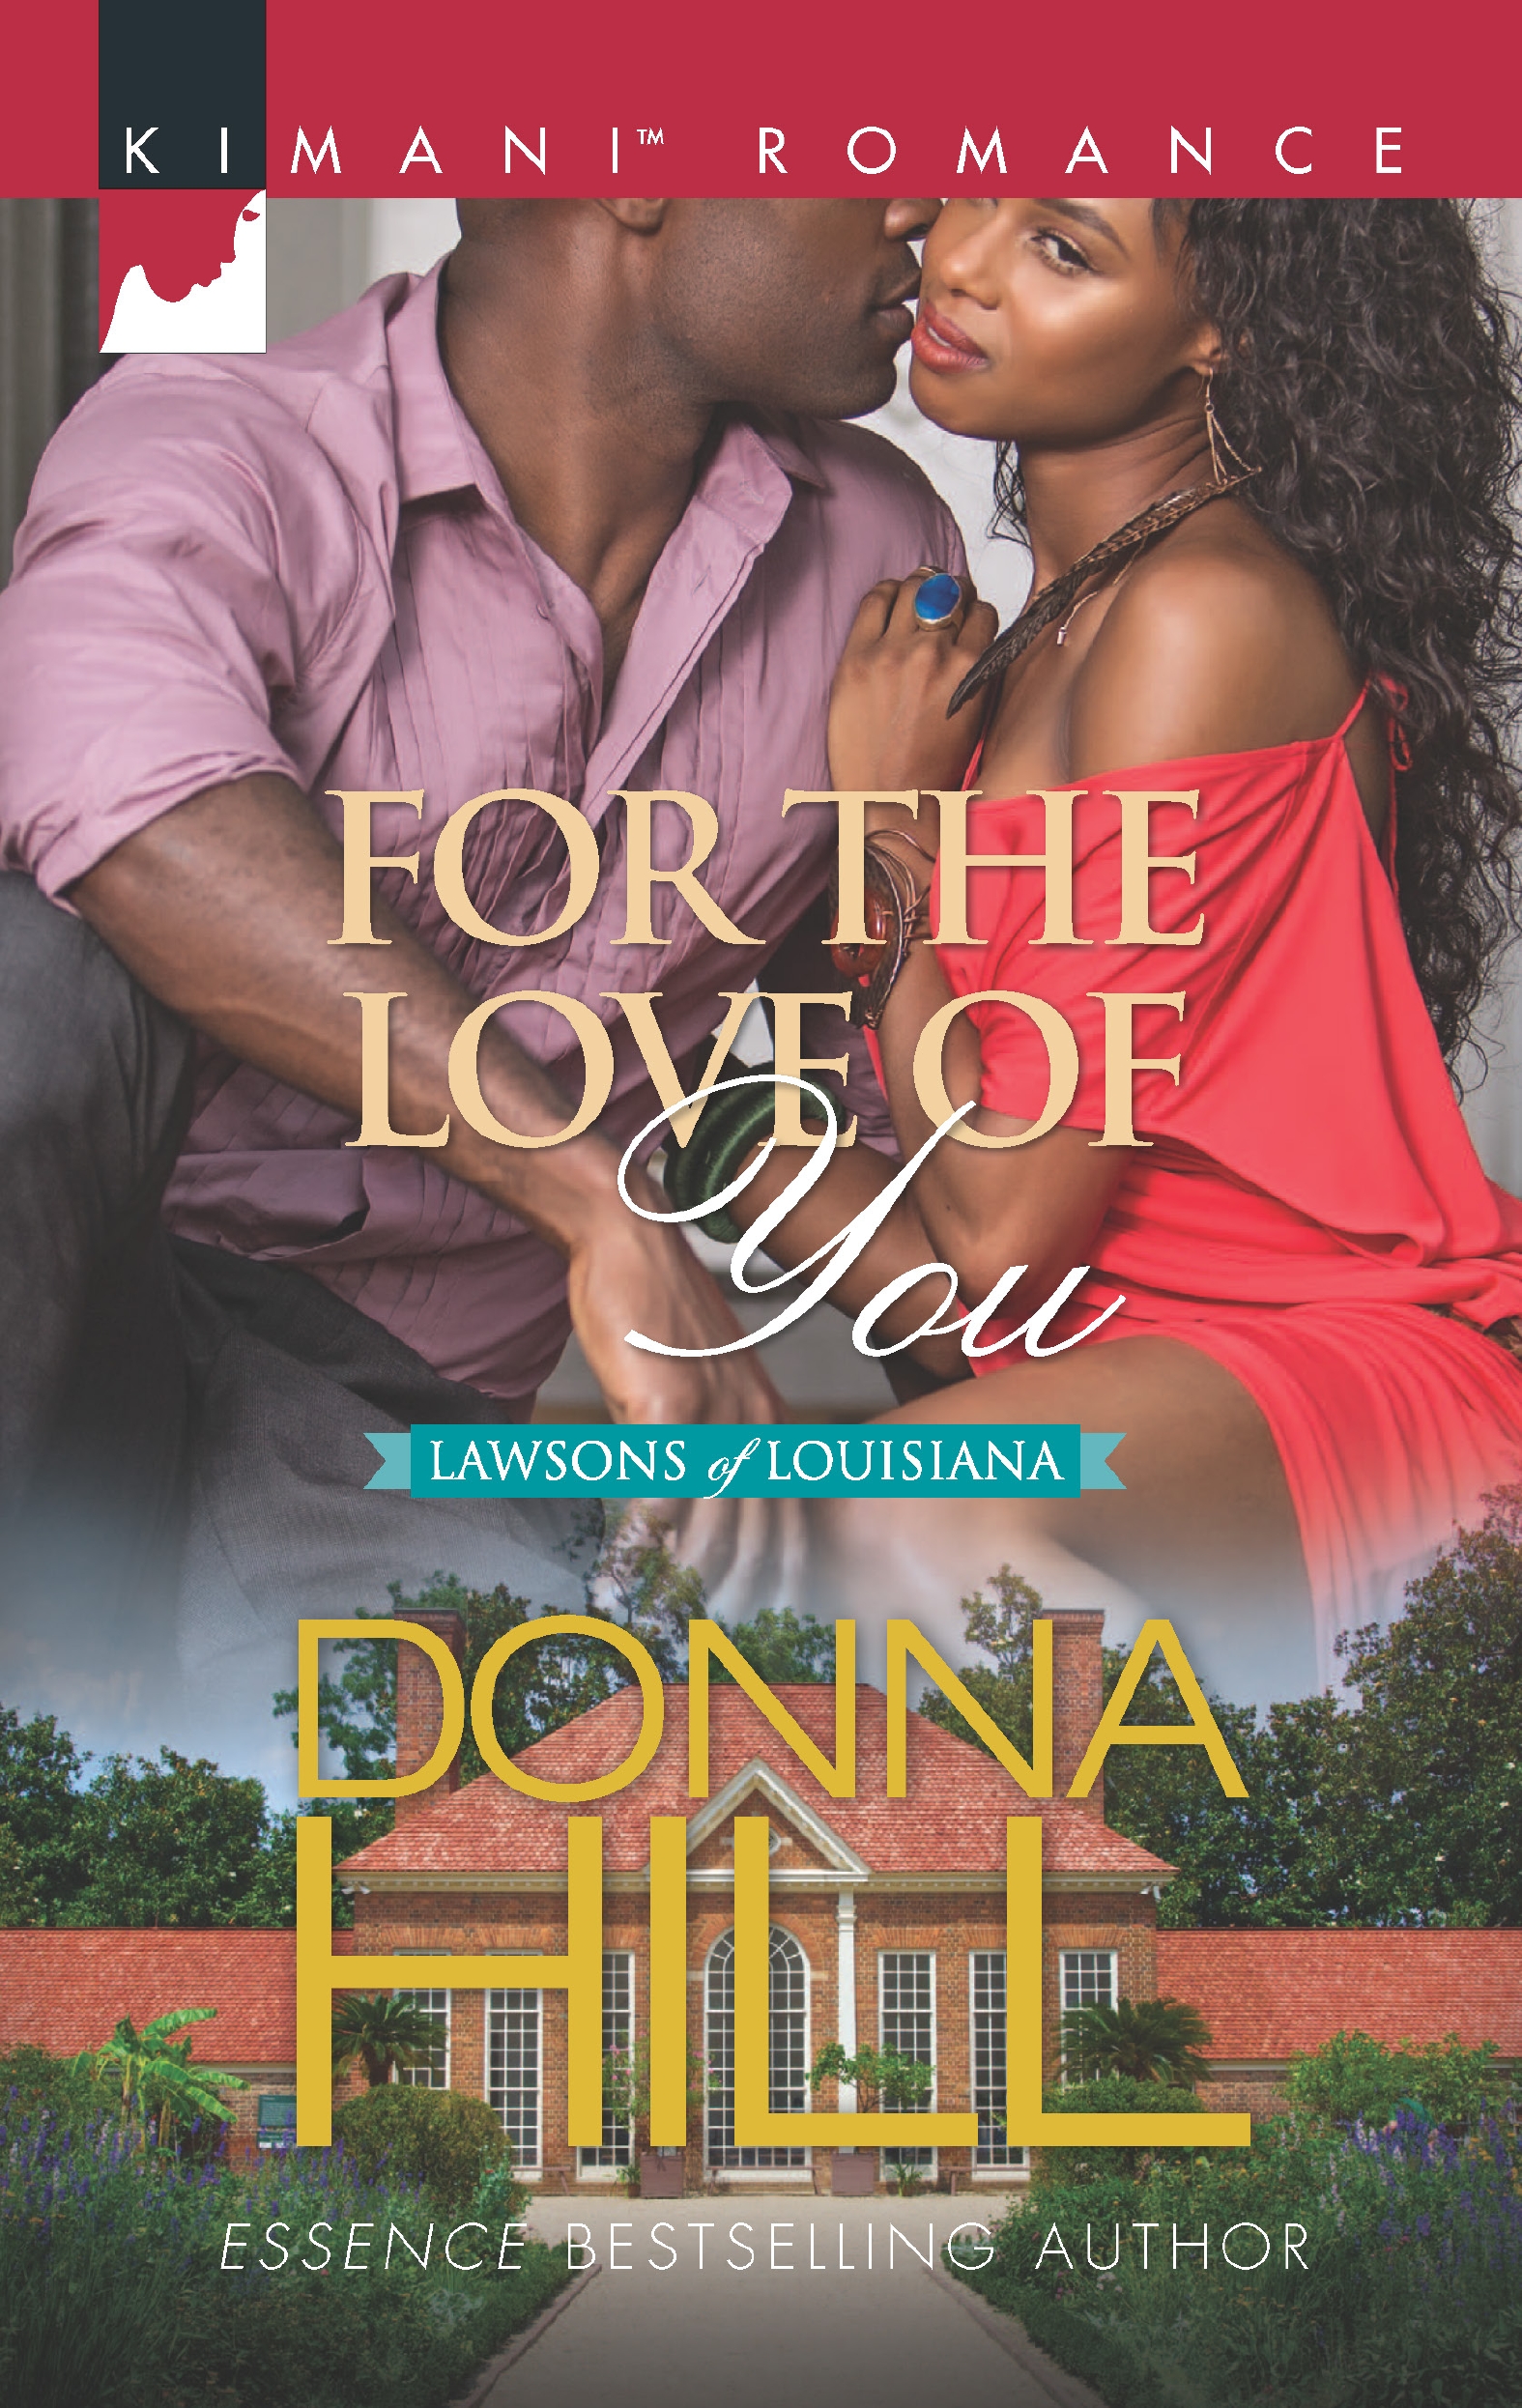 For the Love of You (2016) by Donna Hill